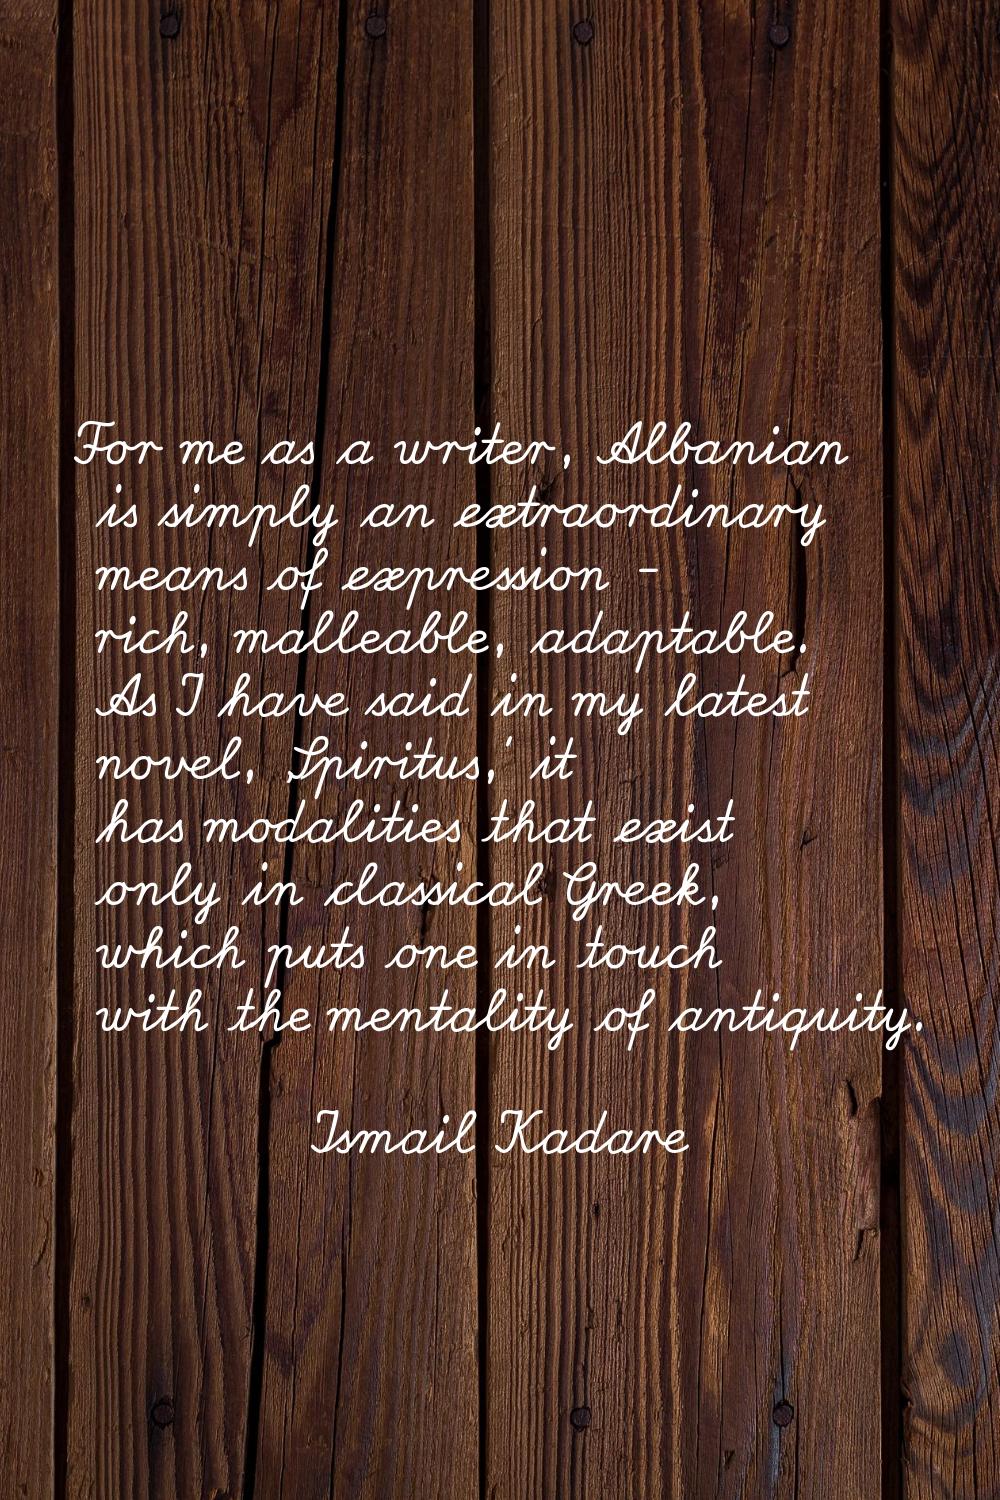 For me as a writer, Albanian is simply an extraordinary means of expression - rich, malleable, adap